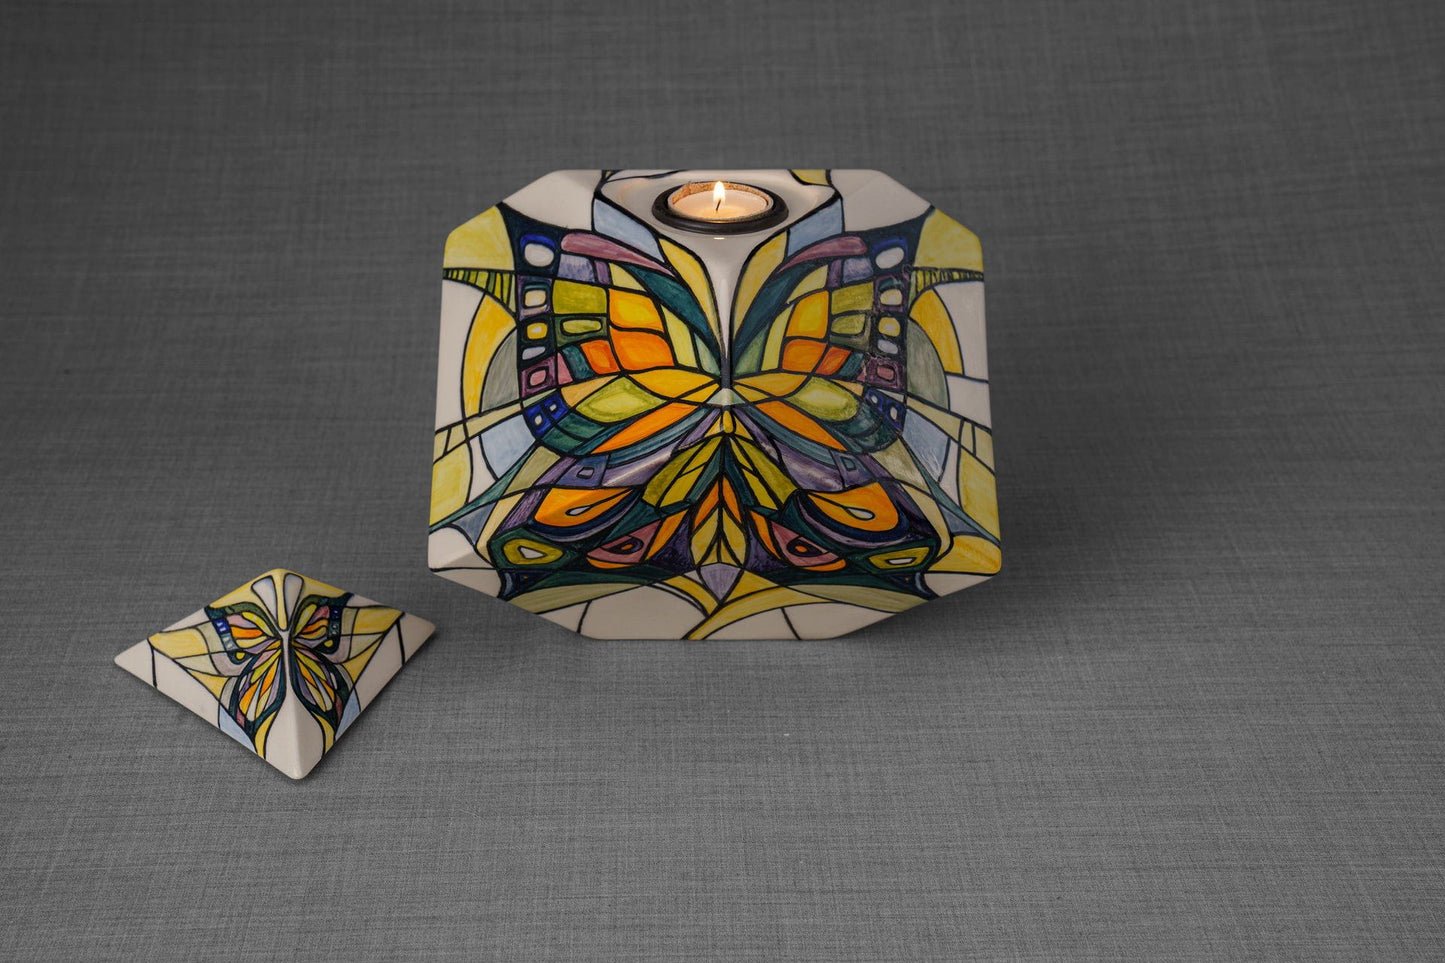 Pulvis Art Urns Adult Size Urn Abstract Hand Decorated Urn "Butterfly" - Large | Ceramic